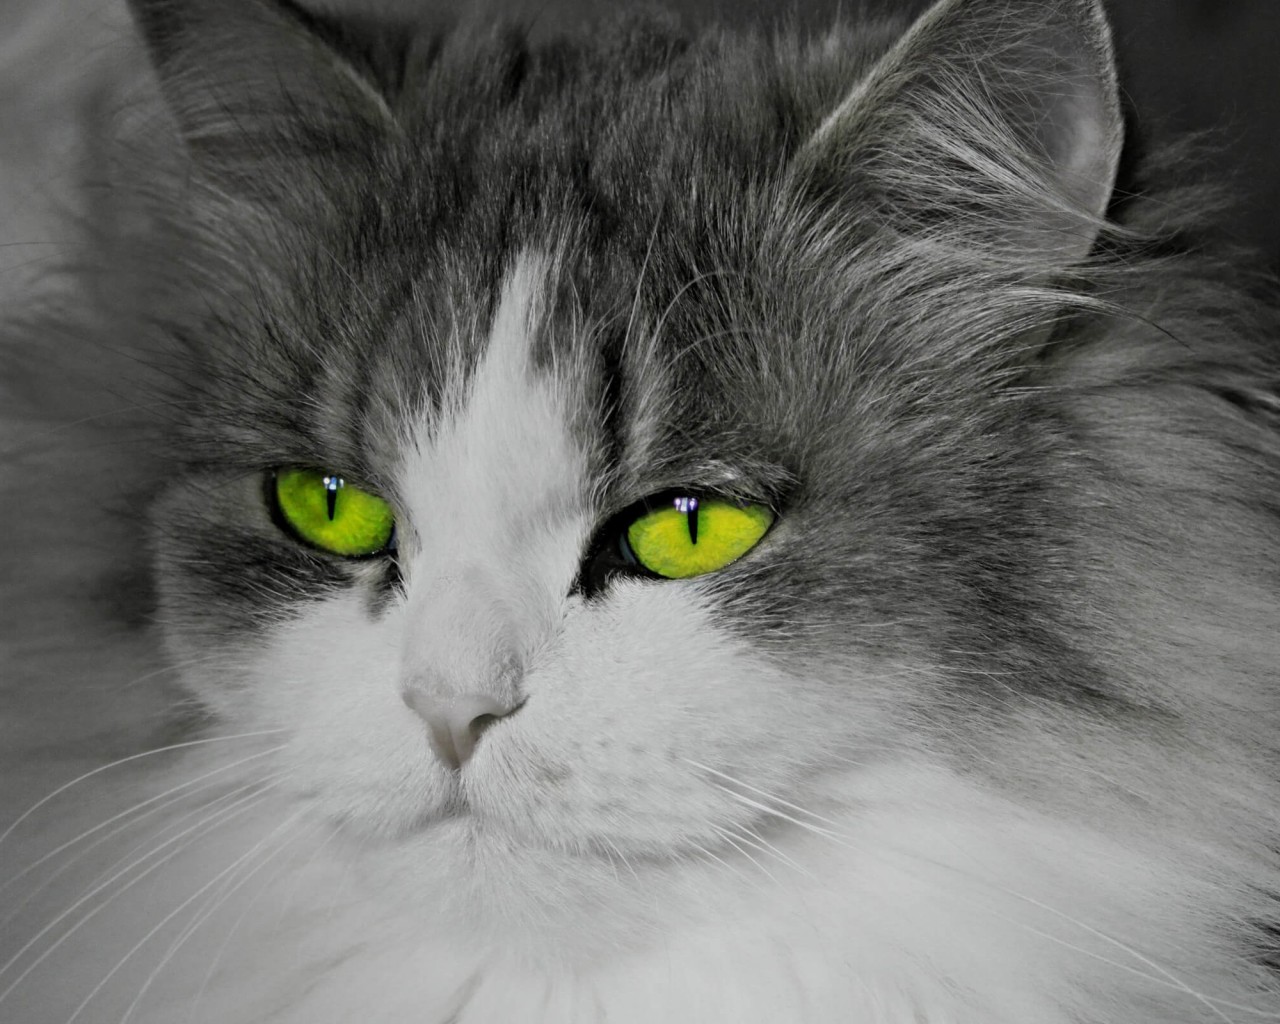 Cat With Stunningly Green Eyes Wallpaper for Desktop 1280x1024